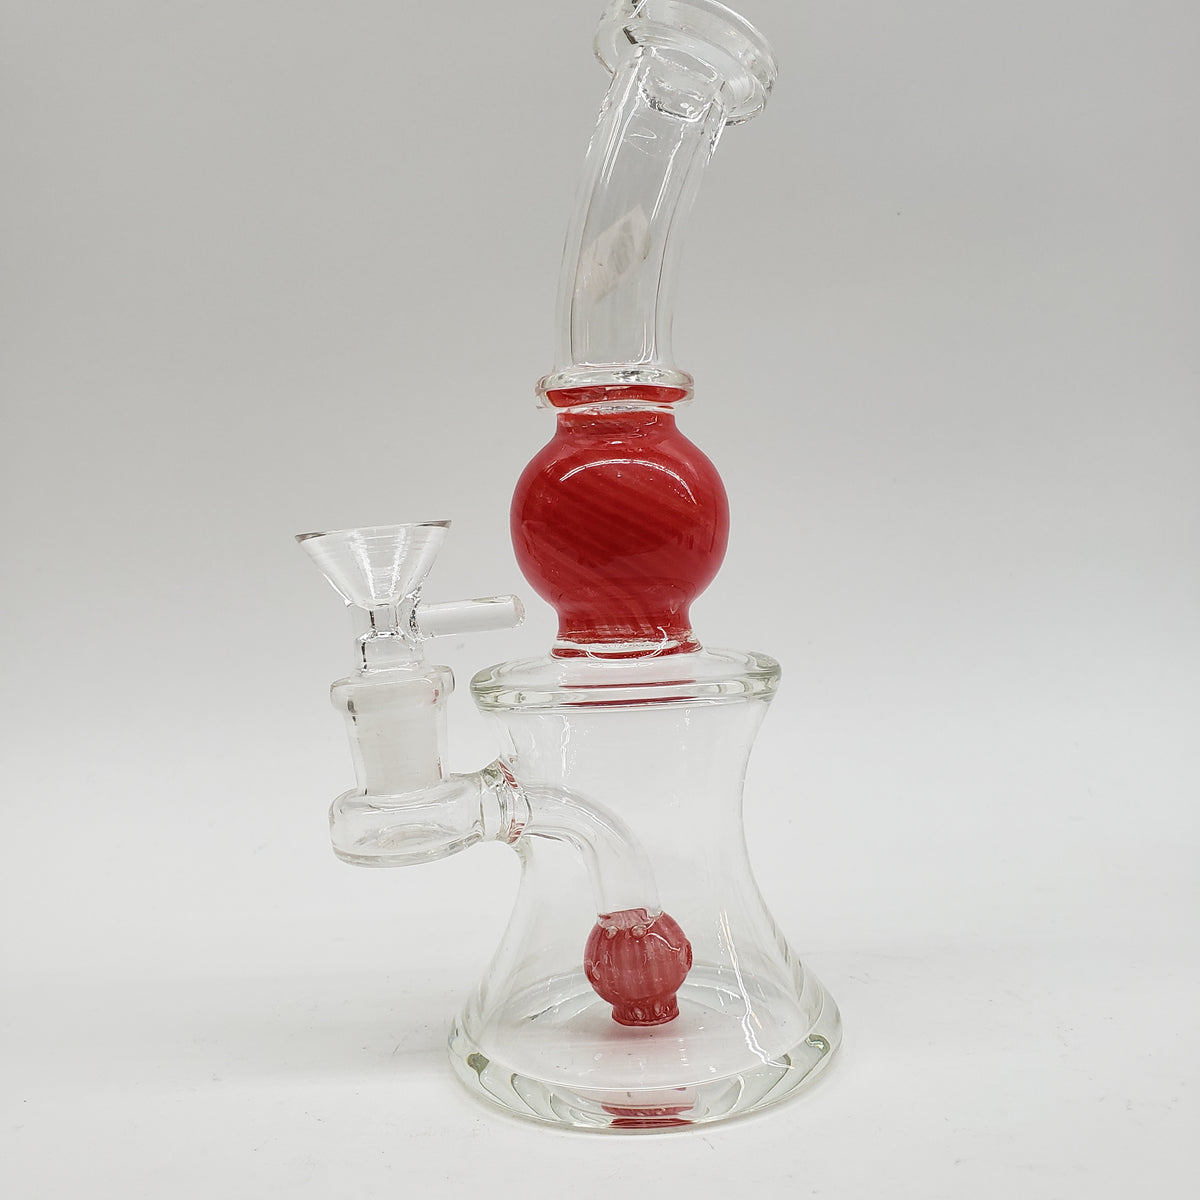 Lil red riding hood rig